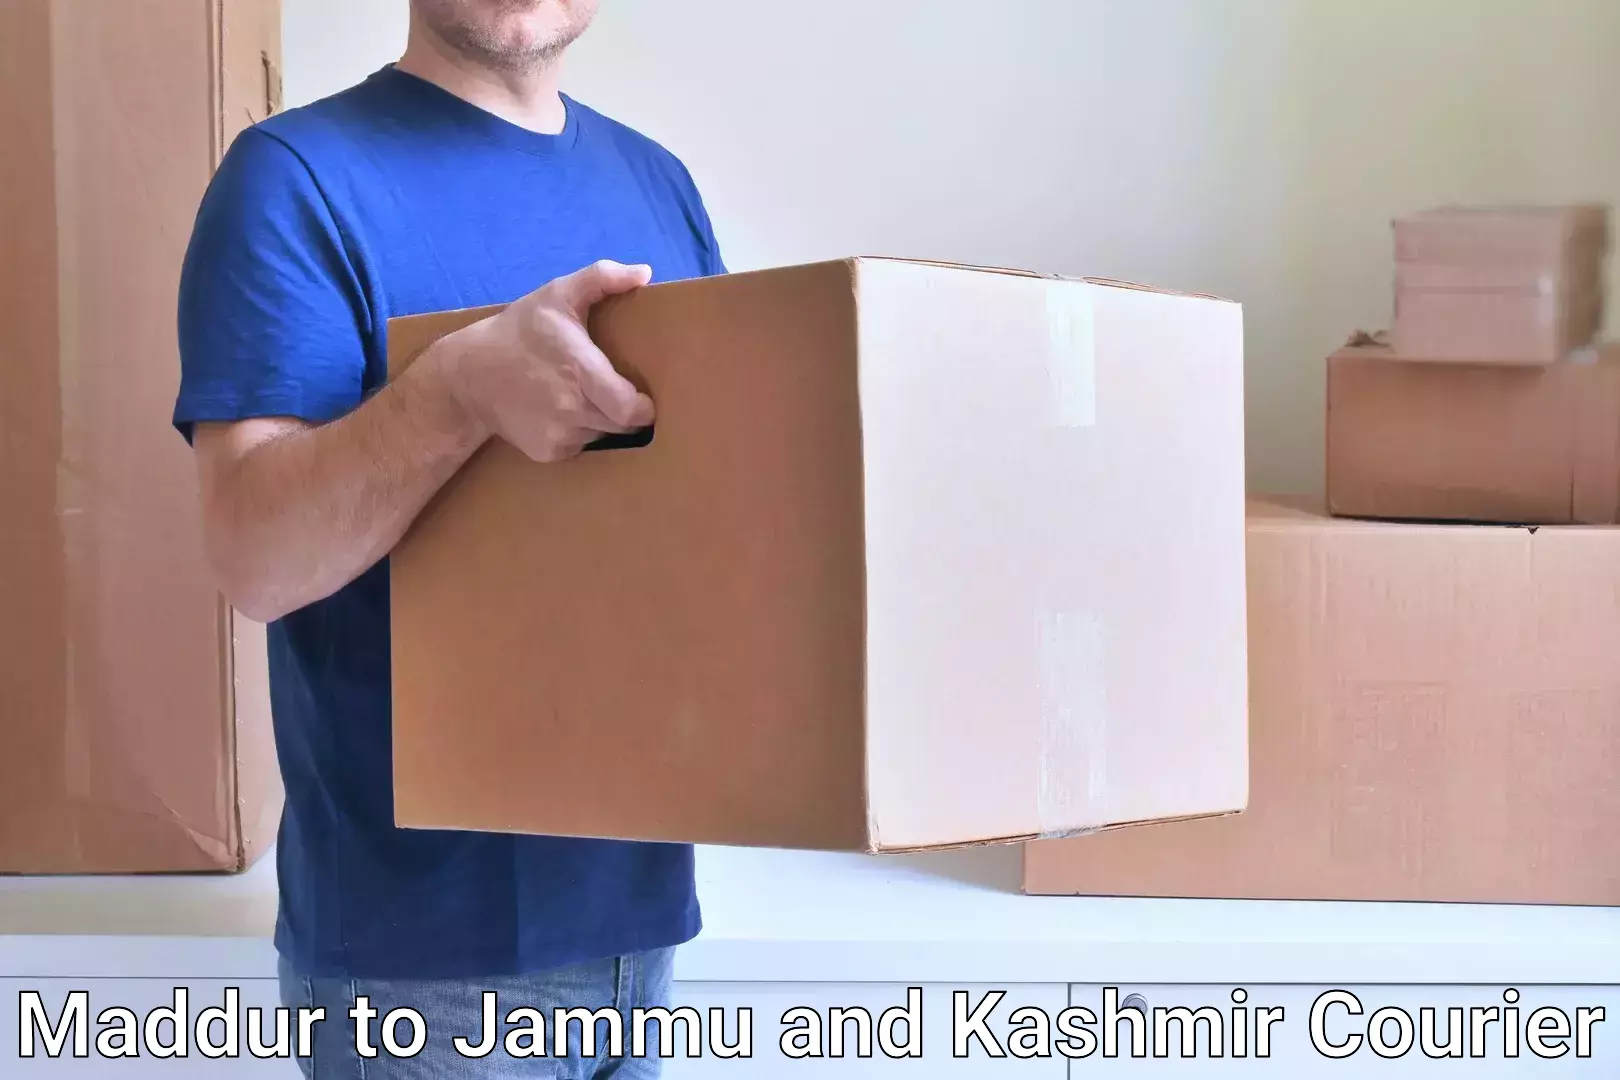 Special handling courier Maddur to Sopore